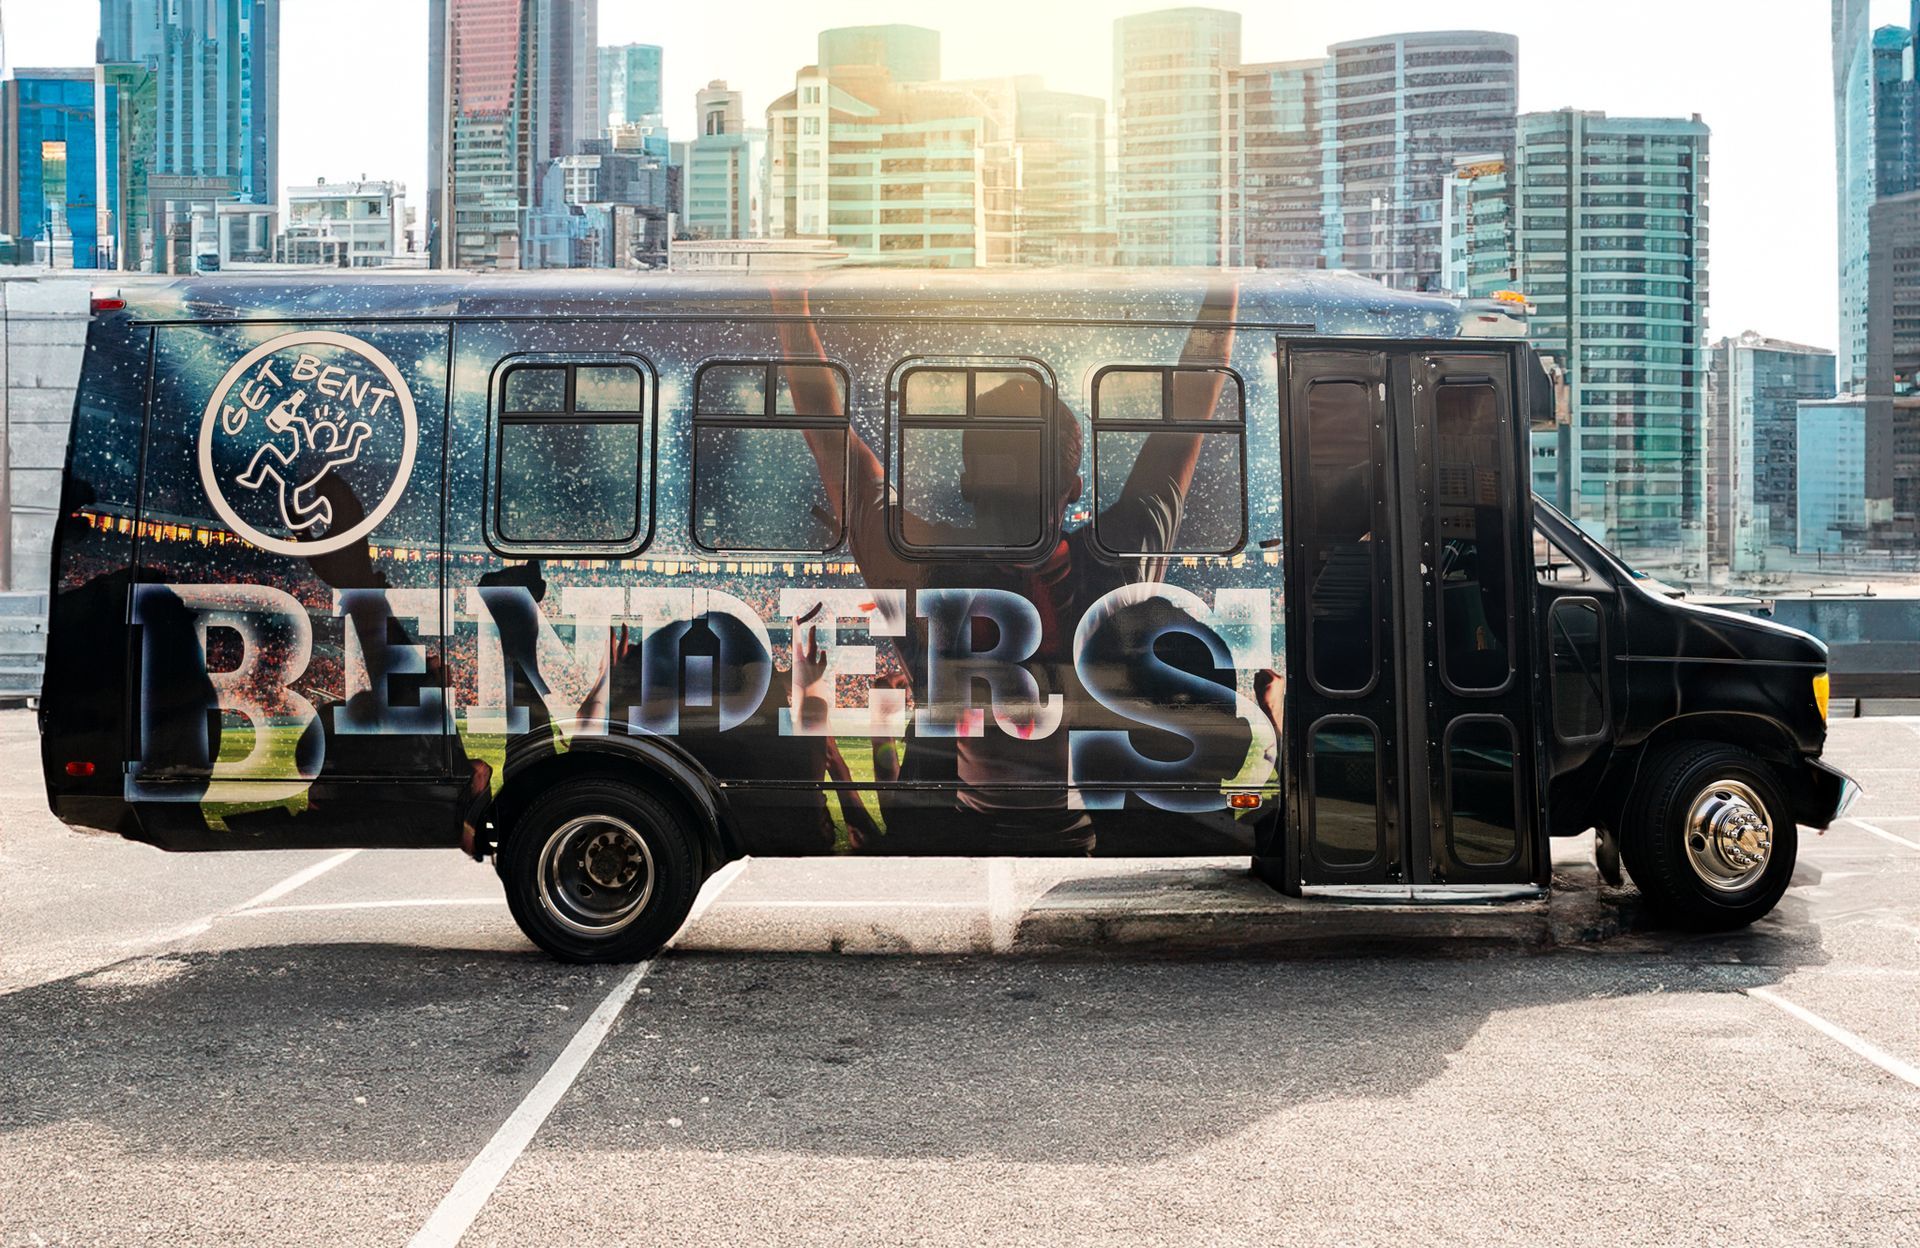 A black bus is parked in a parking lot in front of a city skyline.